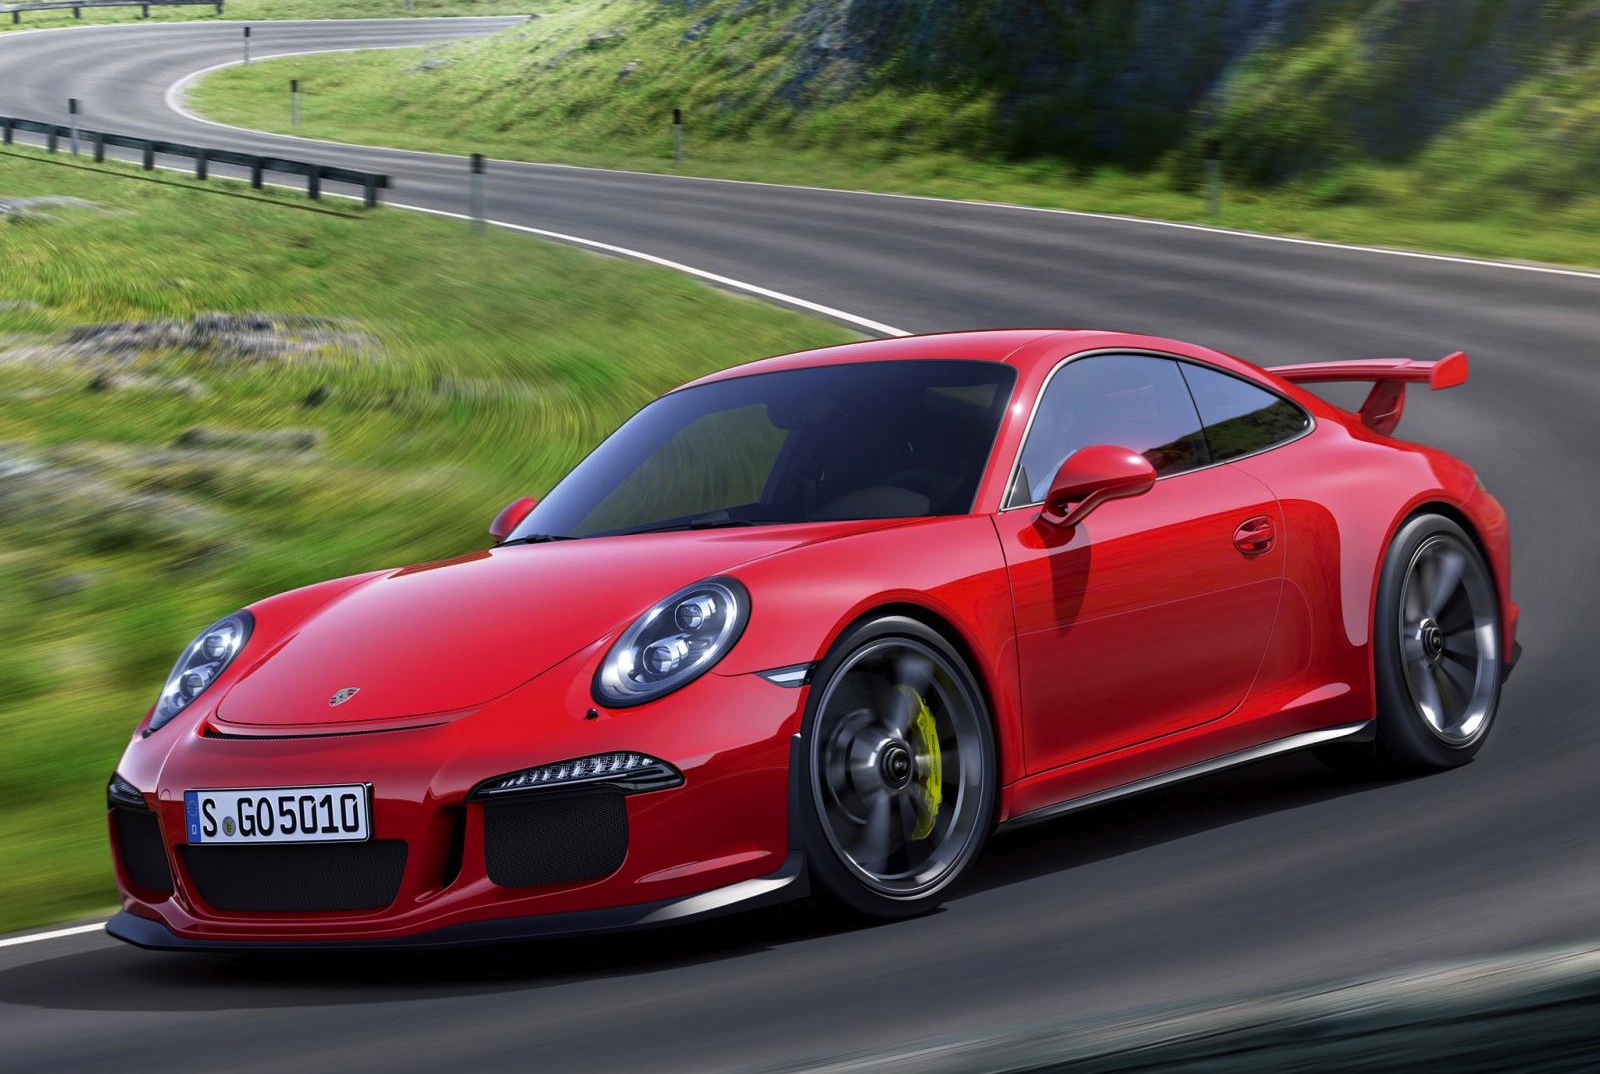 2014 Porsche 911 GT3 RS to feature carbon roof? – report